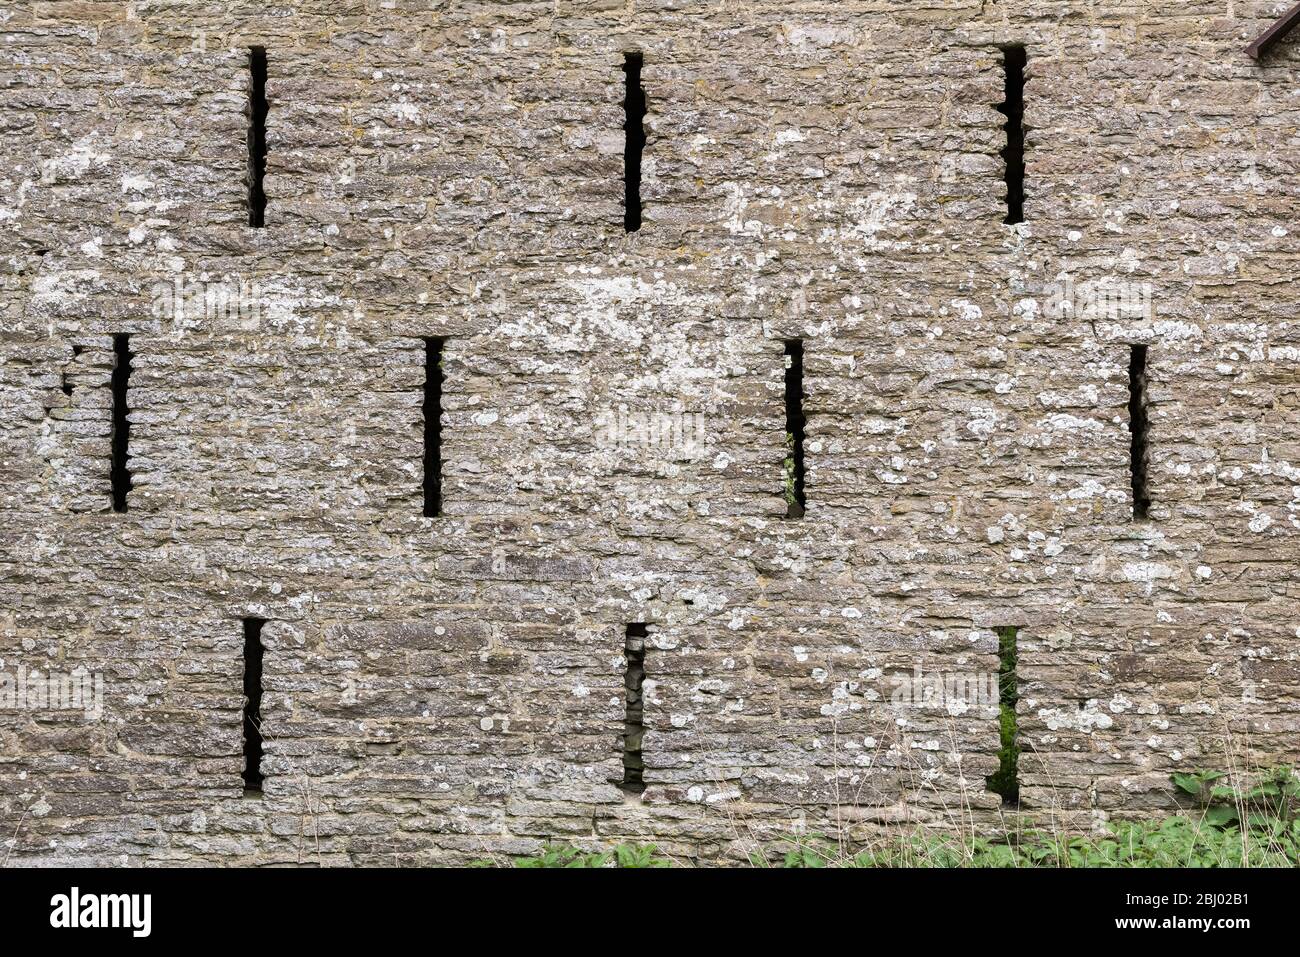 Ventilation slits in the wall of an old stone barn, Herefordshire, UK Stock Photo